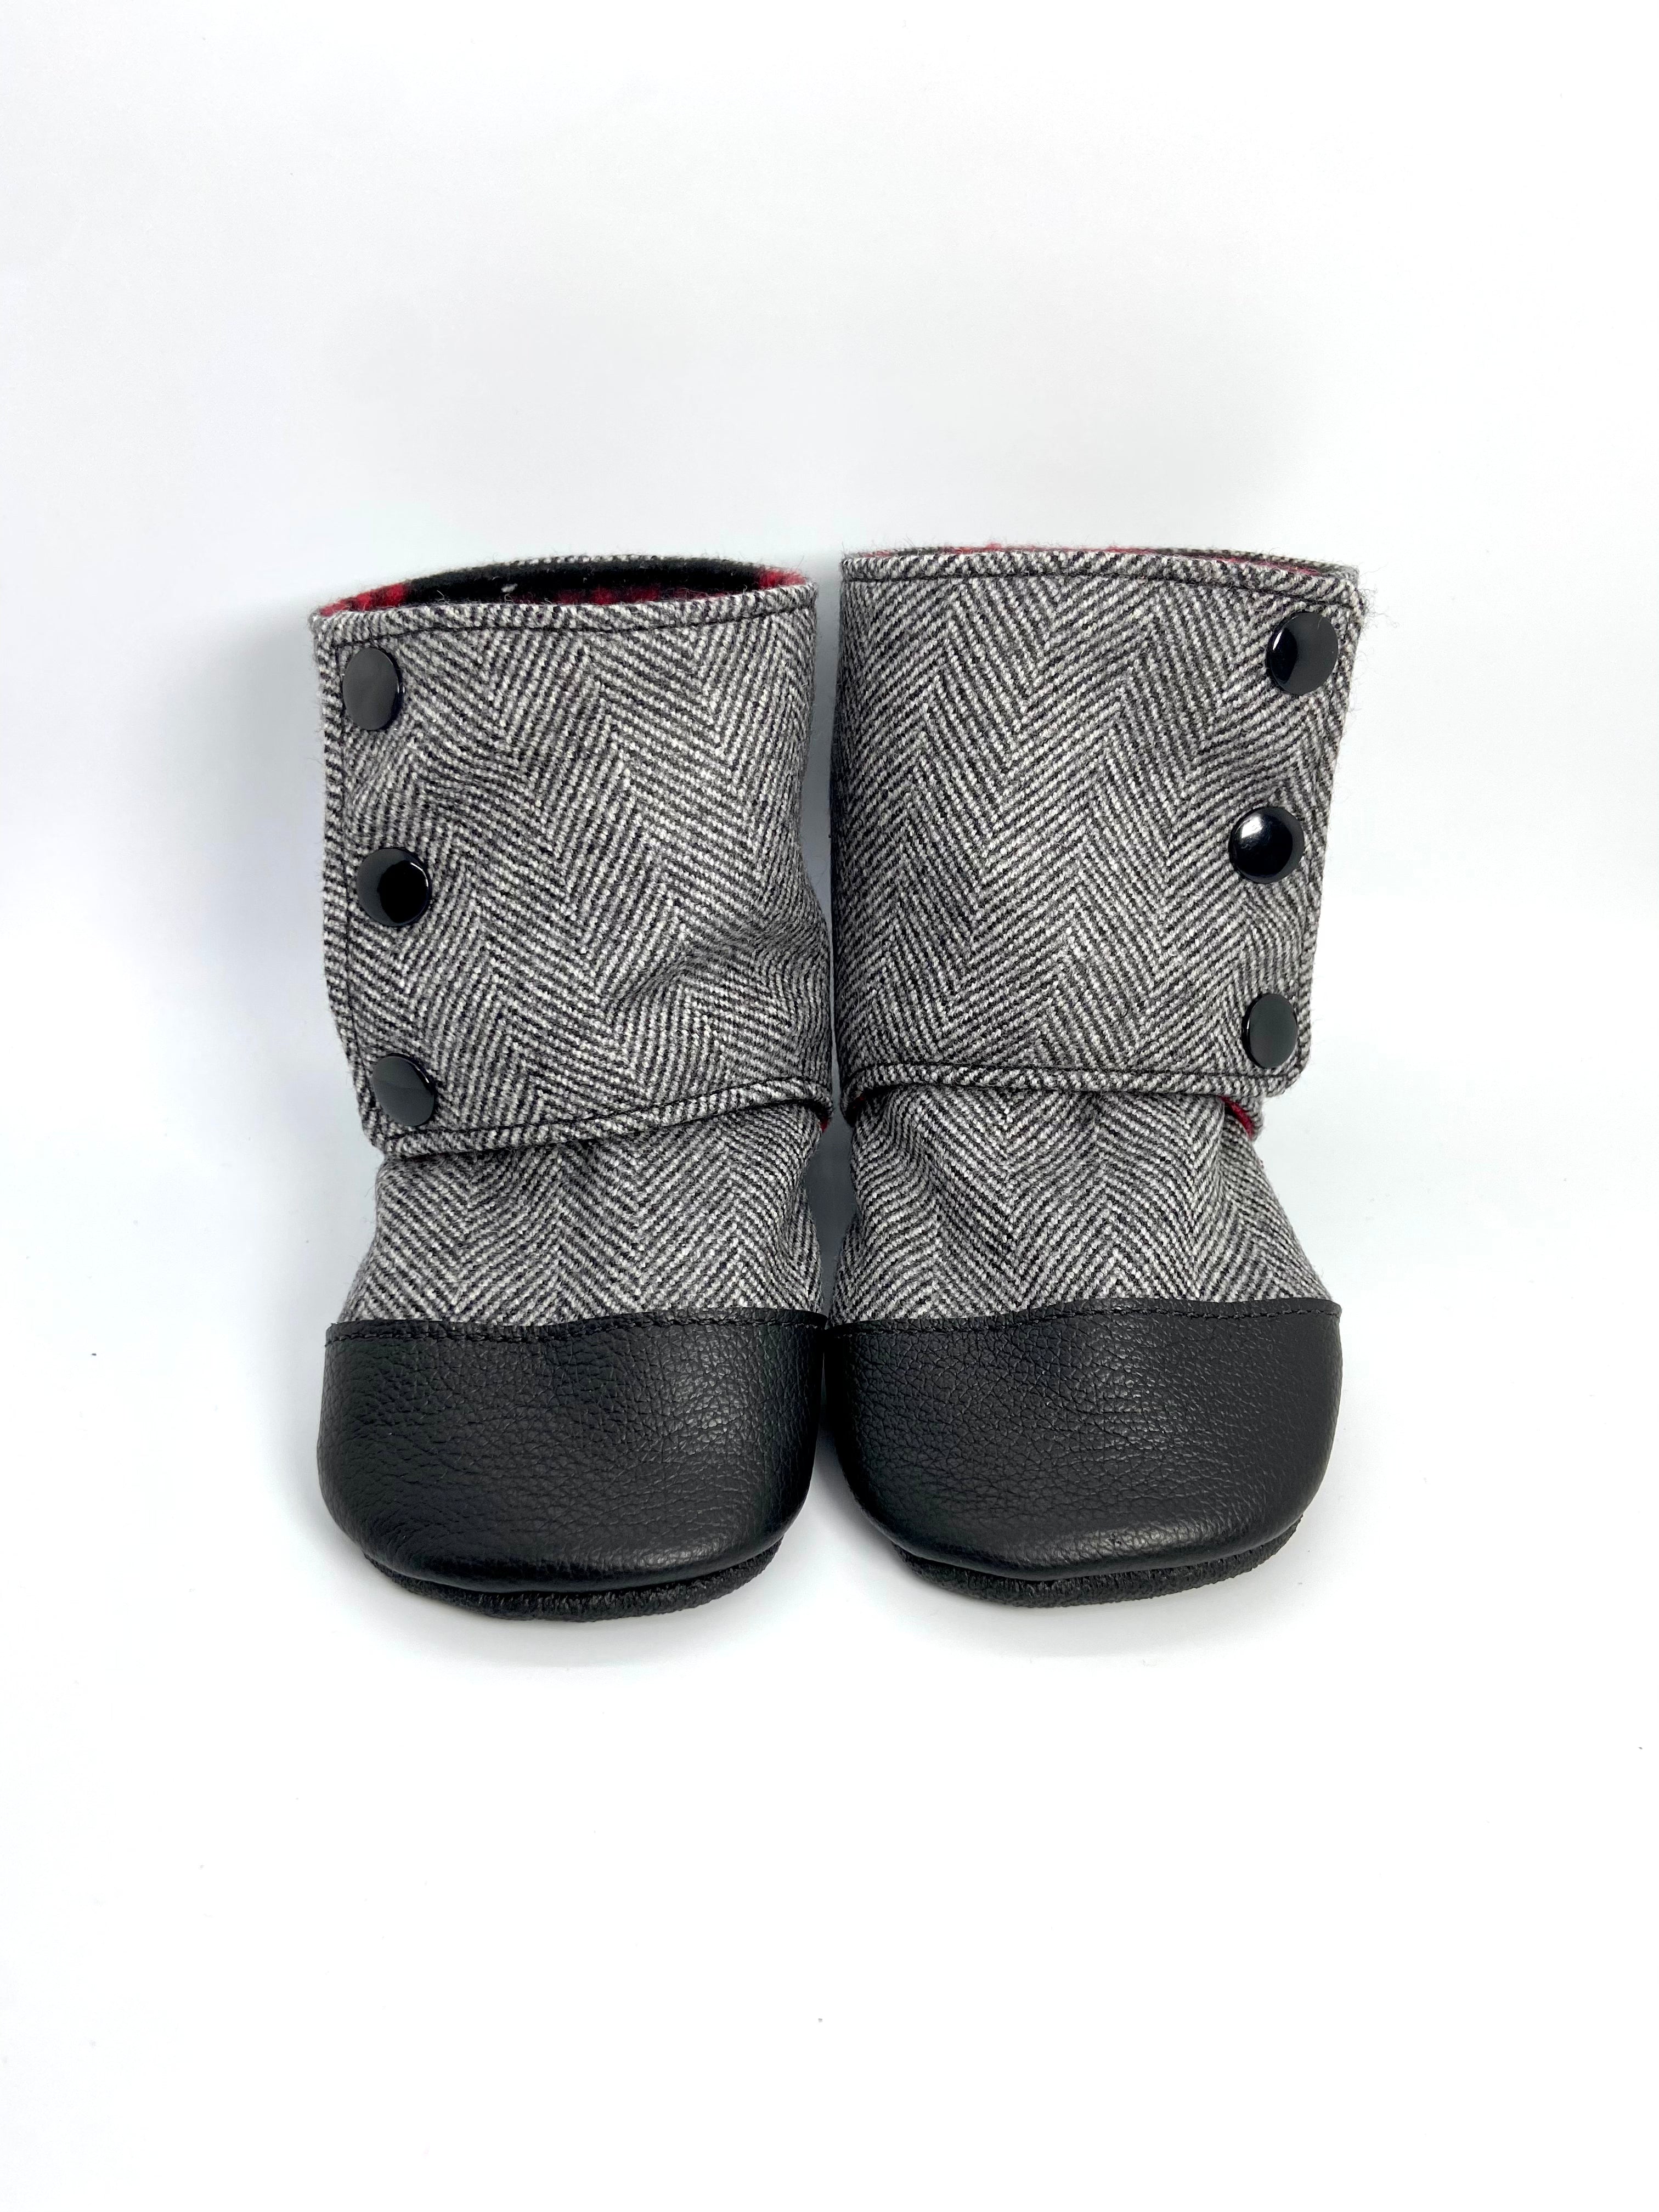 RTS Wool Snap Boot s9